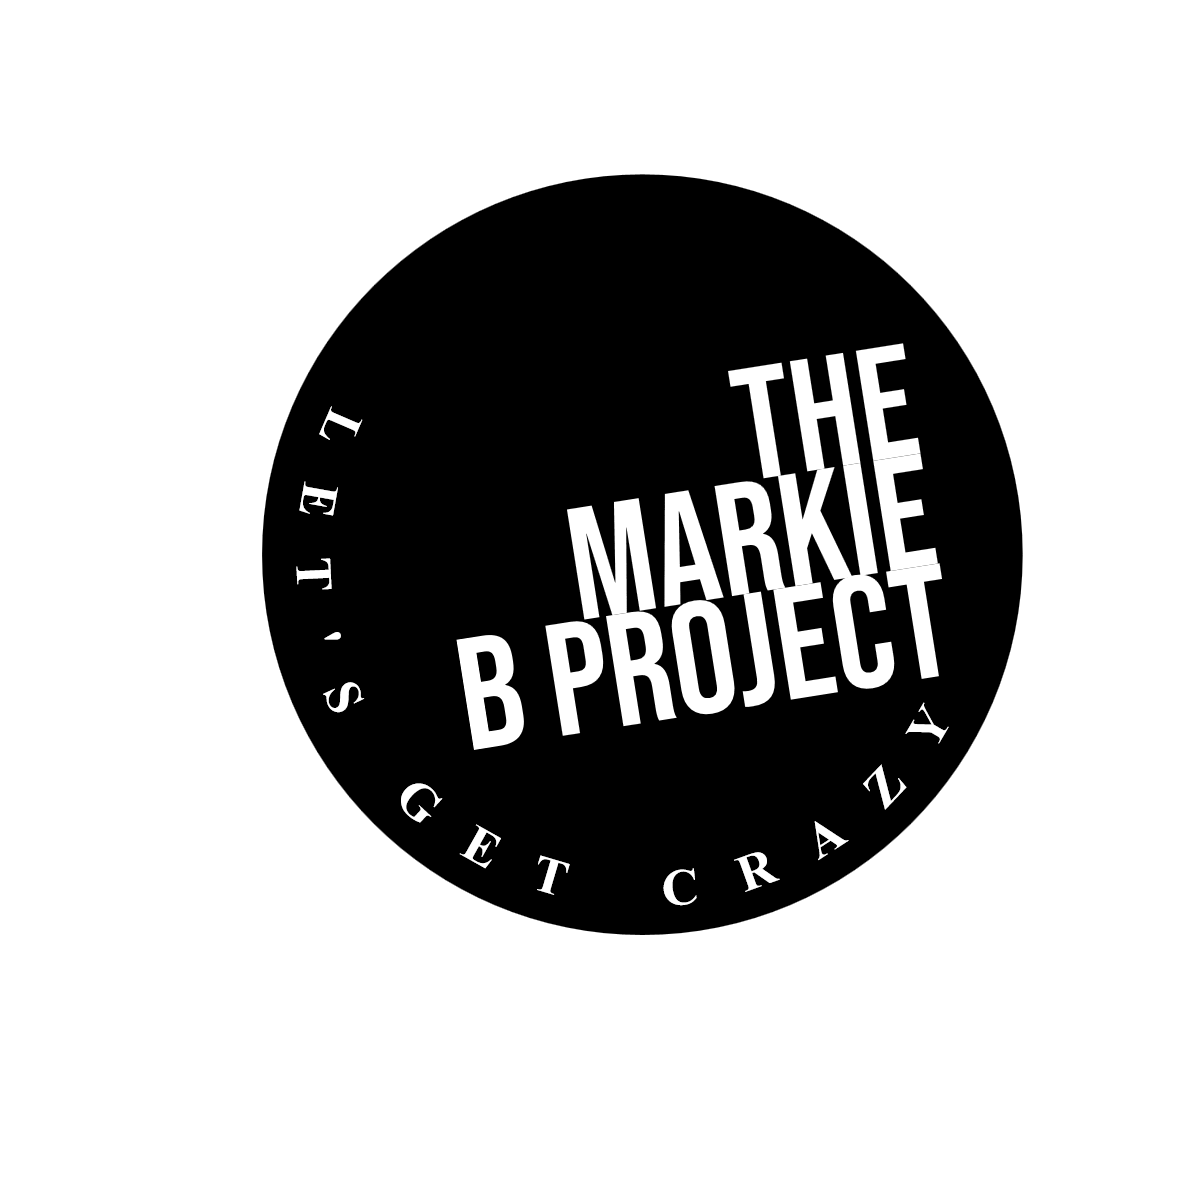 THE MARKIE B PROJECT